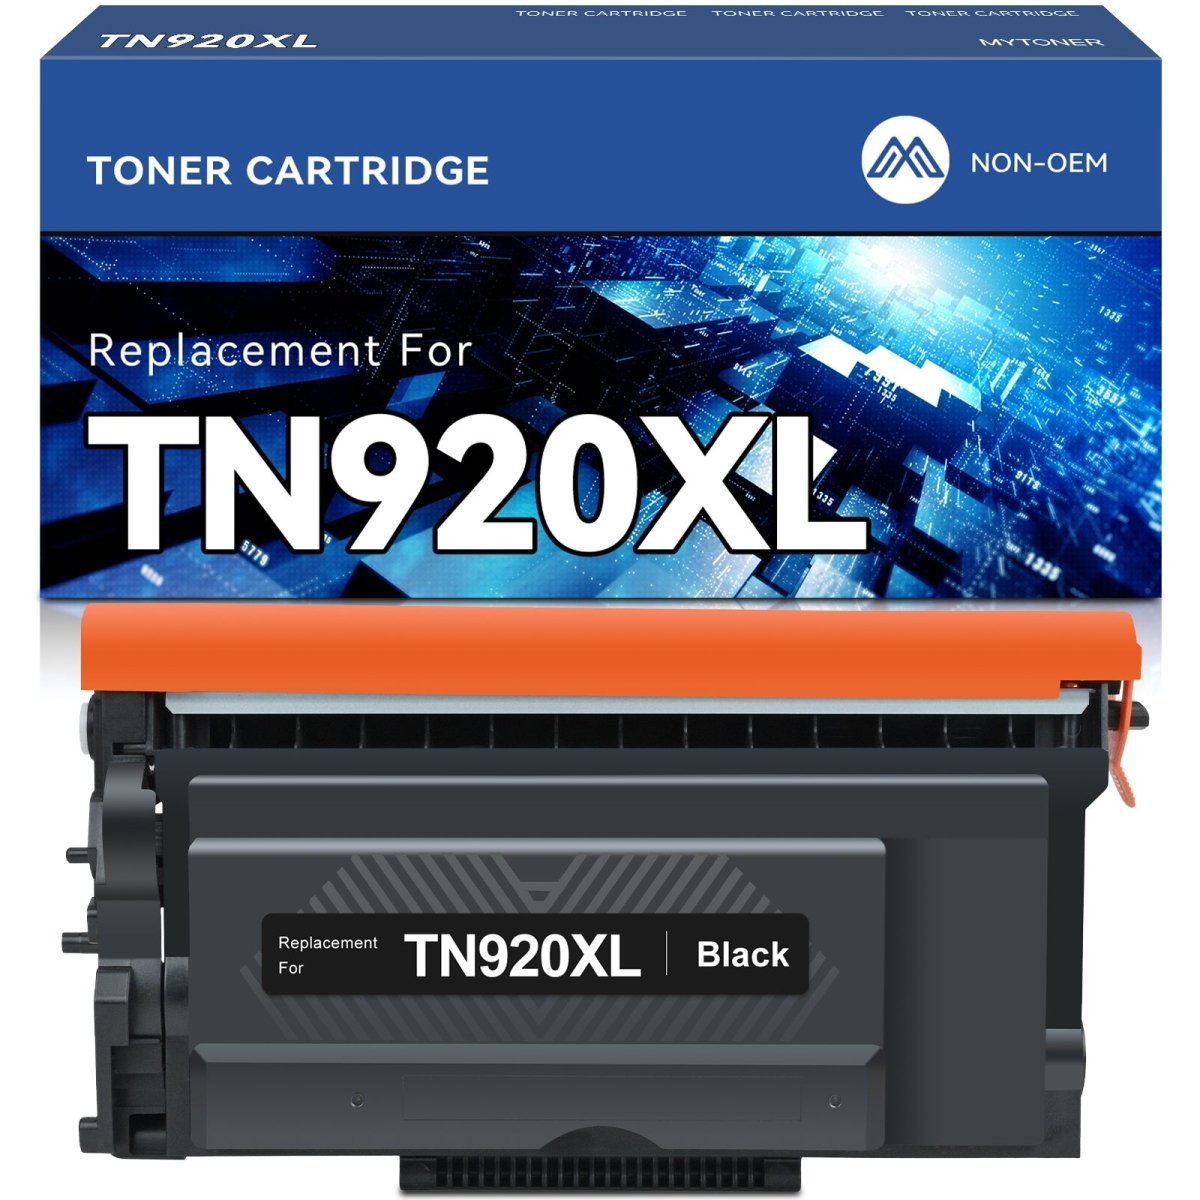 Compatible Brother TN920XL Toner Cartridge High Yield (Black, 1 Pack) - Linford Office:Printer Ink & Toner Cartridge